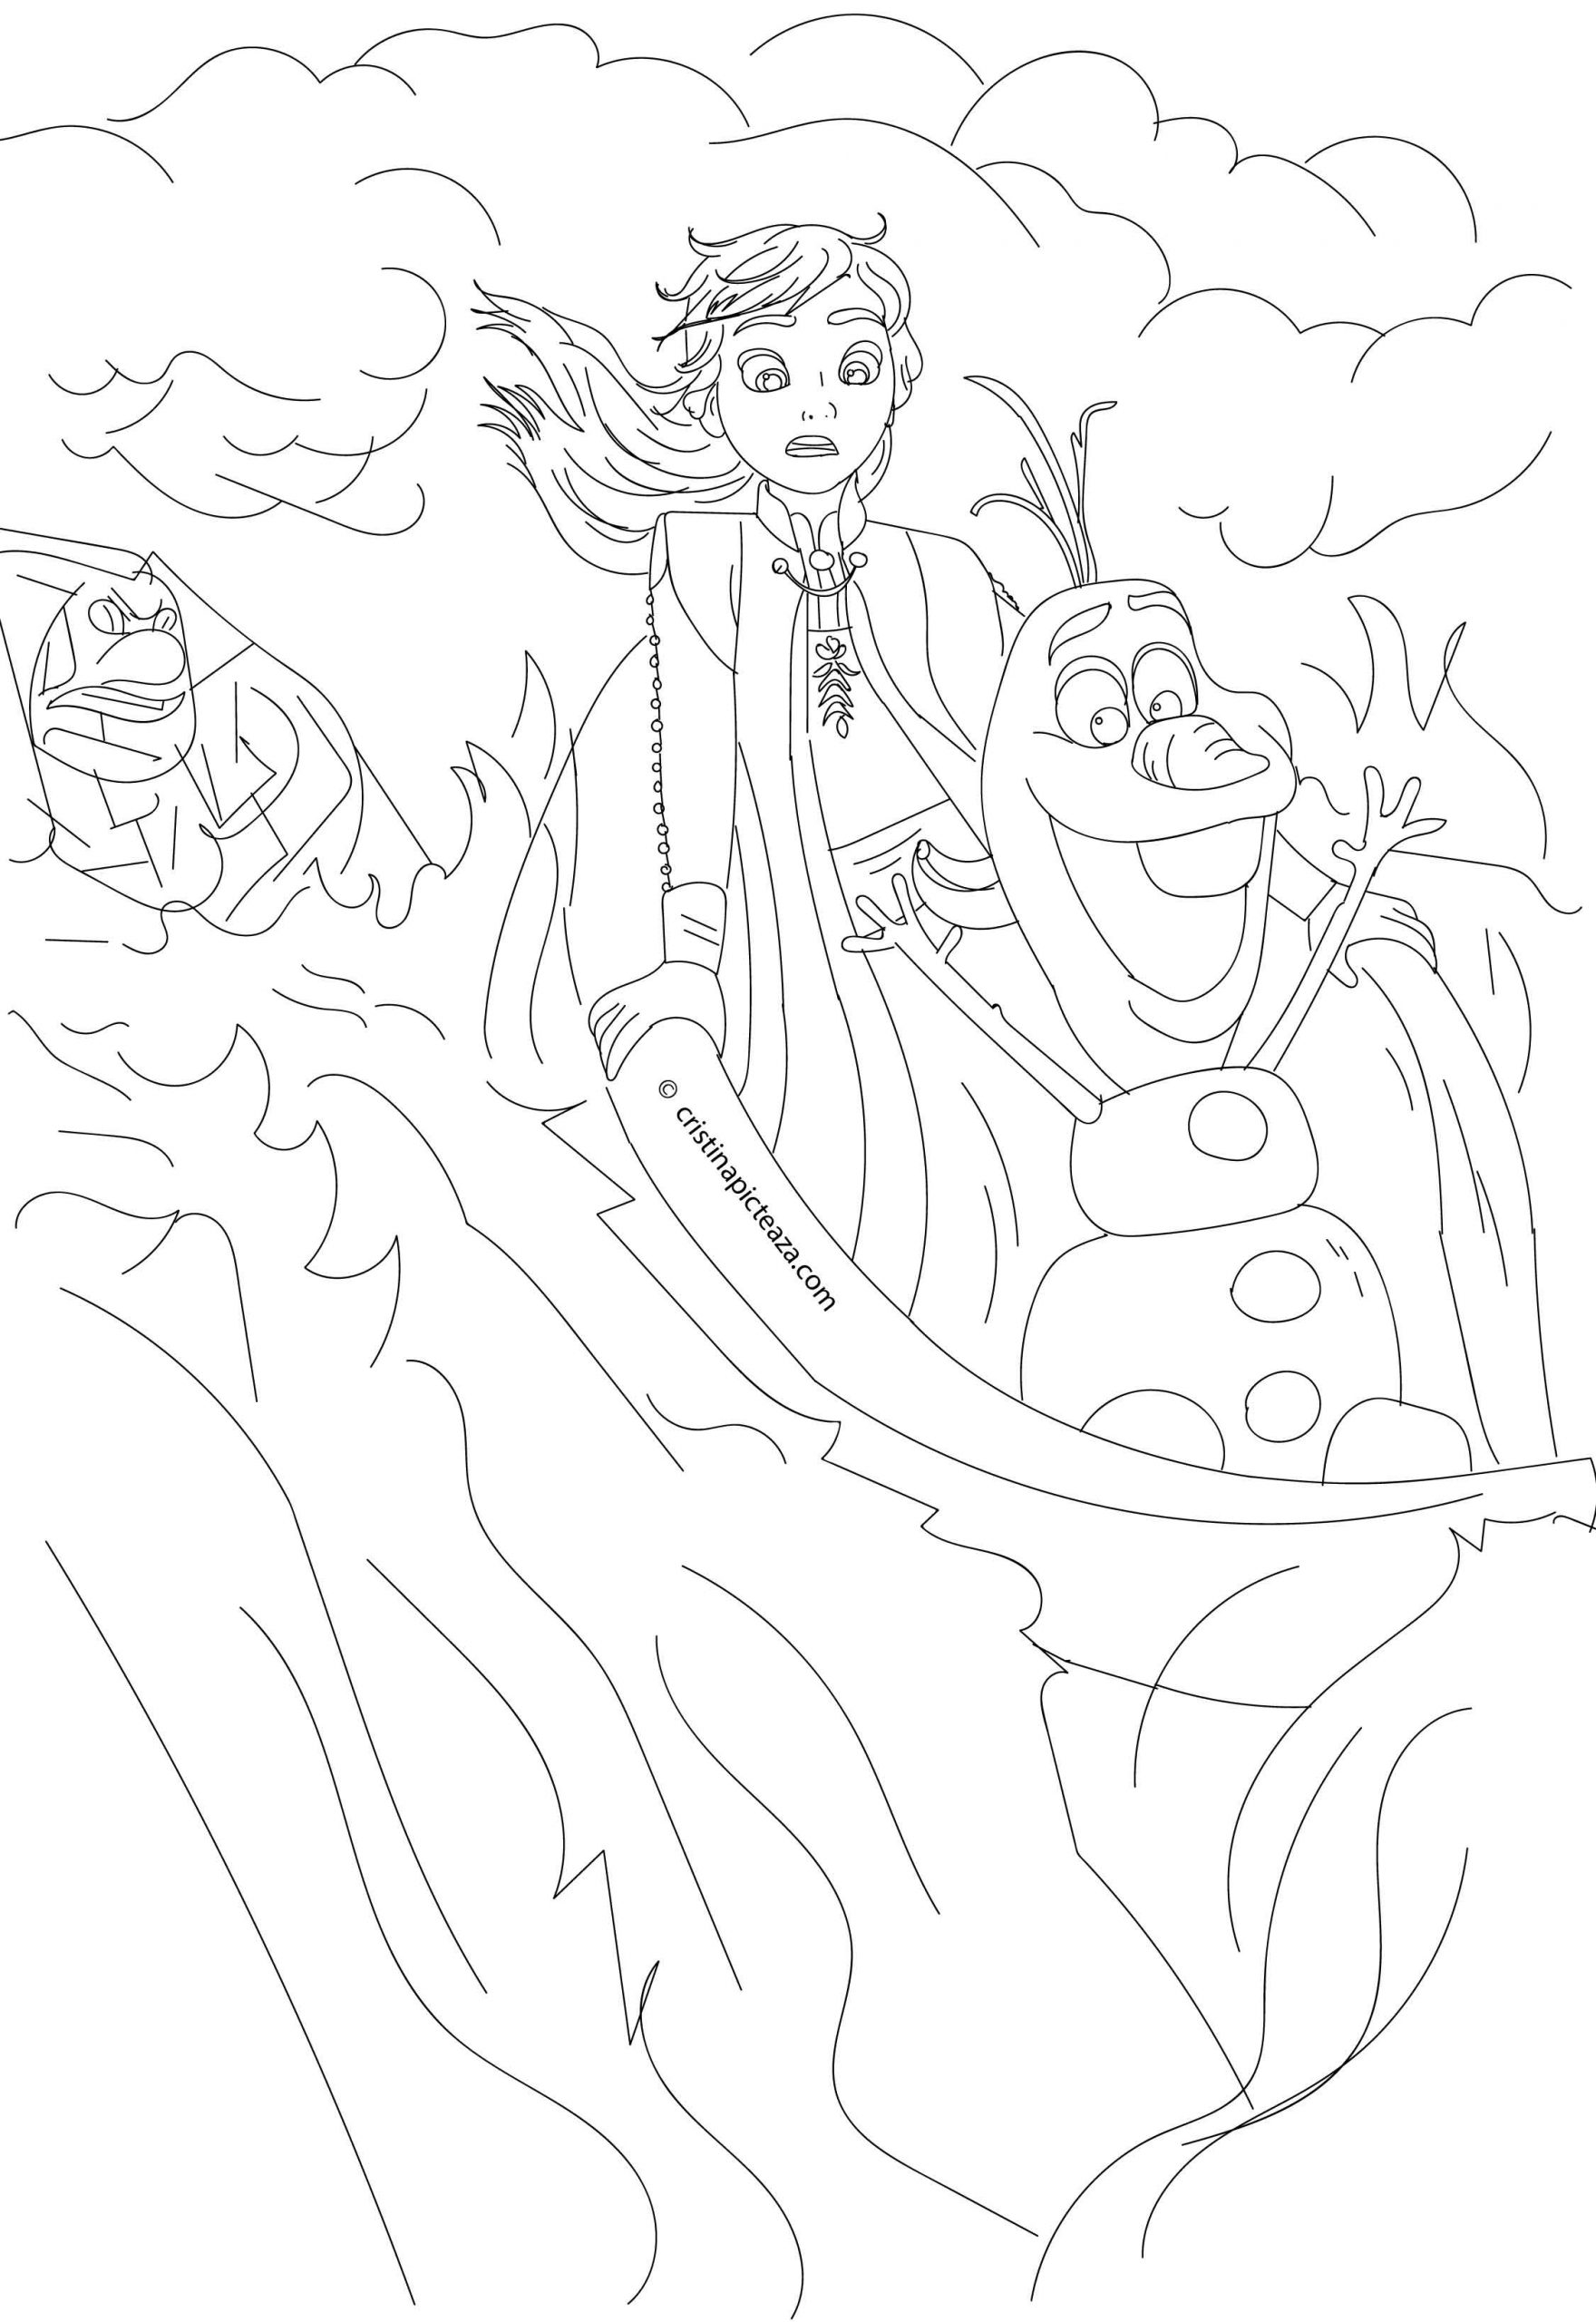 Frozen 2 Coloring Pages - Elsa and Anna coloring